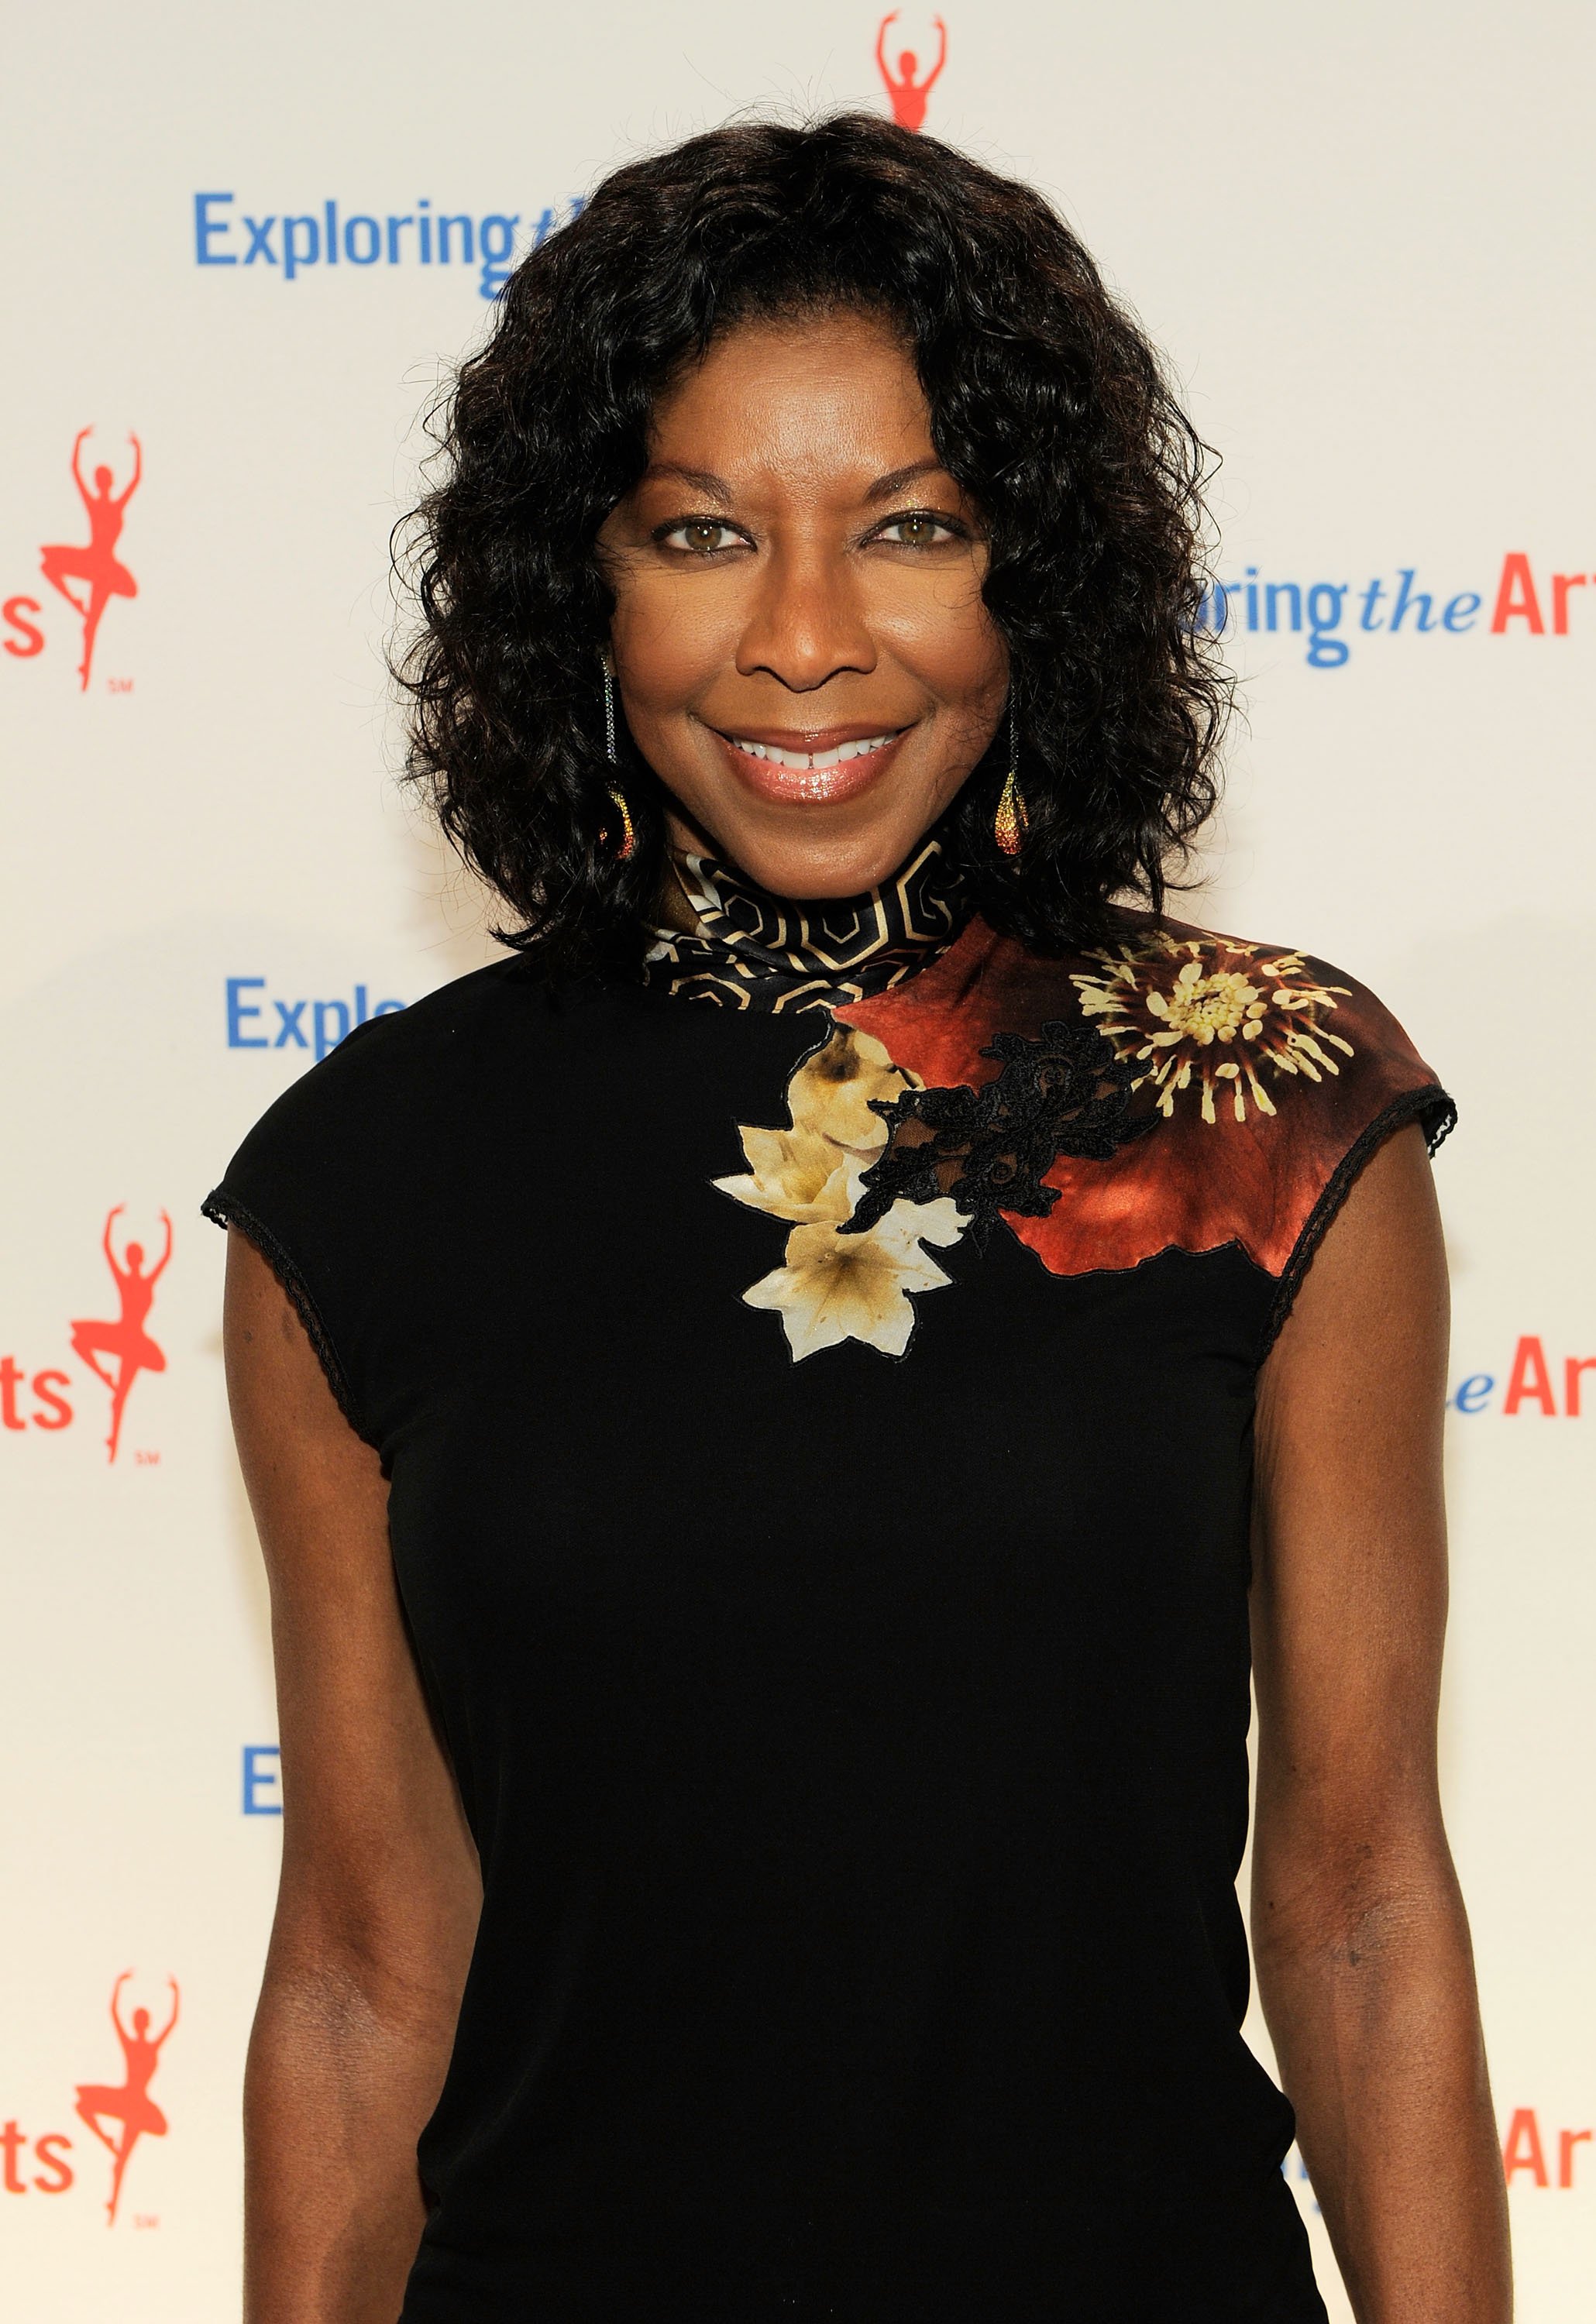 Singer Natalie Cole attends the Exploring the Arts Gala at Cipriani, Wall Street on September 27, 2010, in New York City. | Source: Getty Images